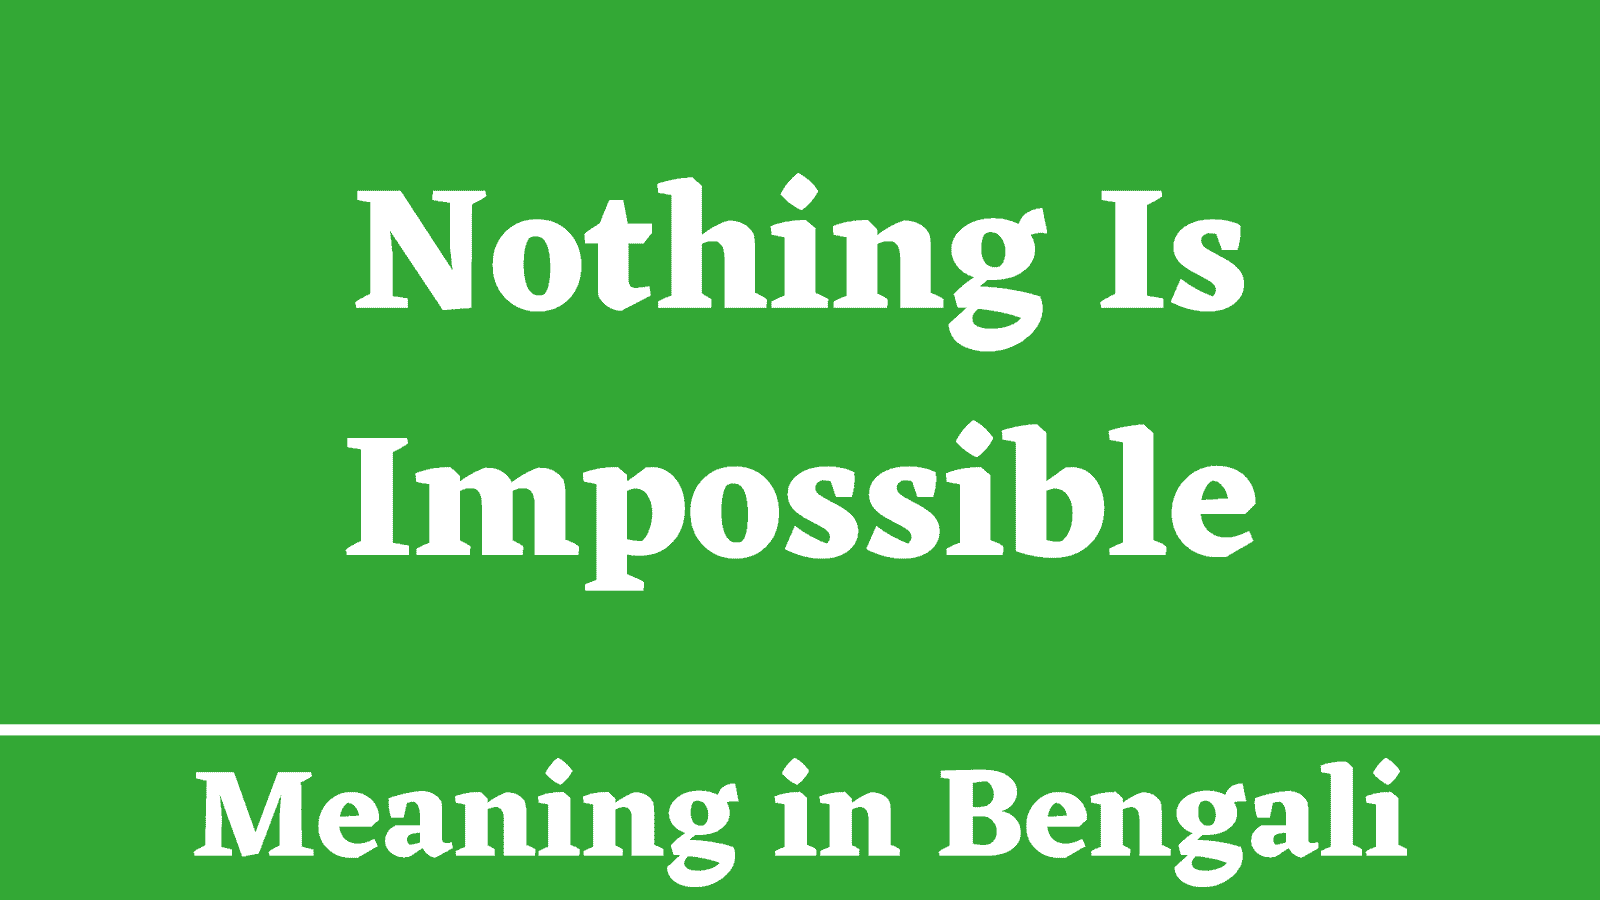 Nothing Is Impossible Meaning in Bengali